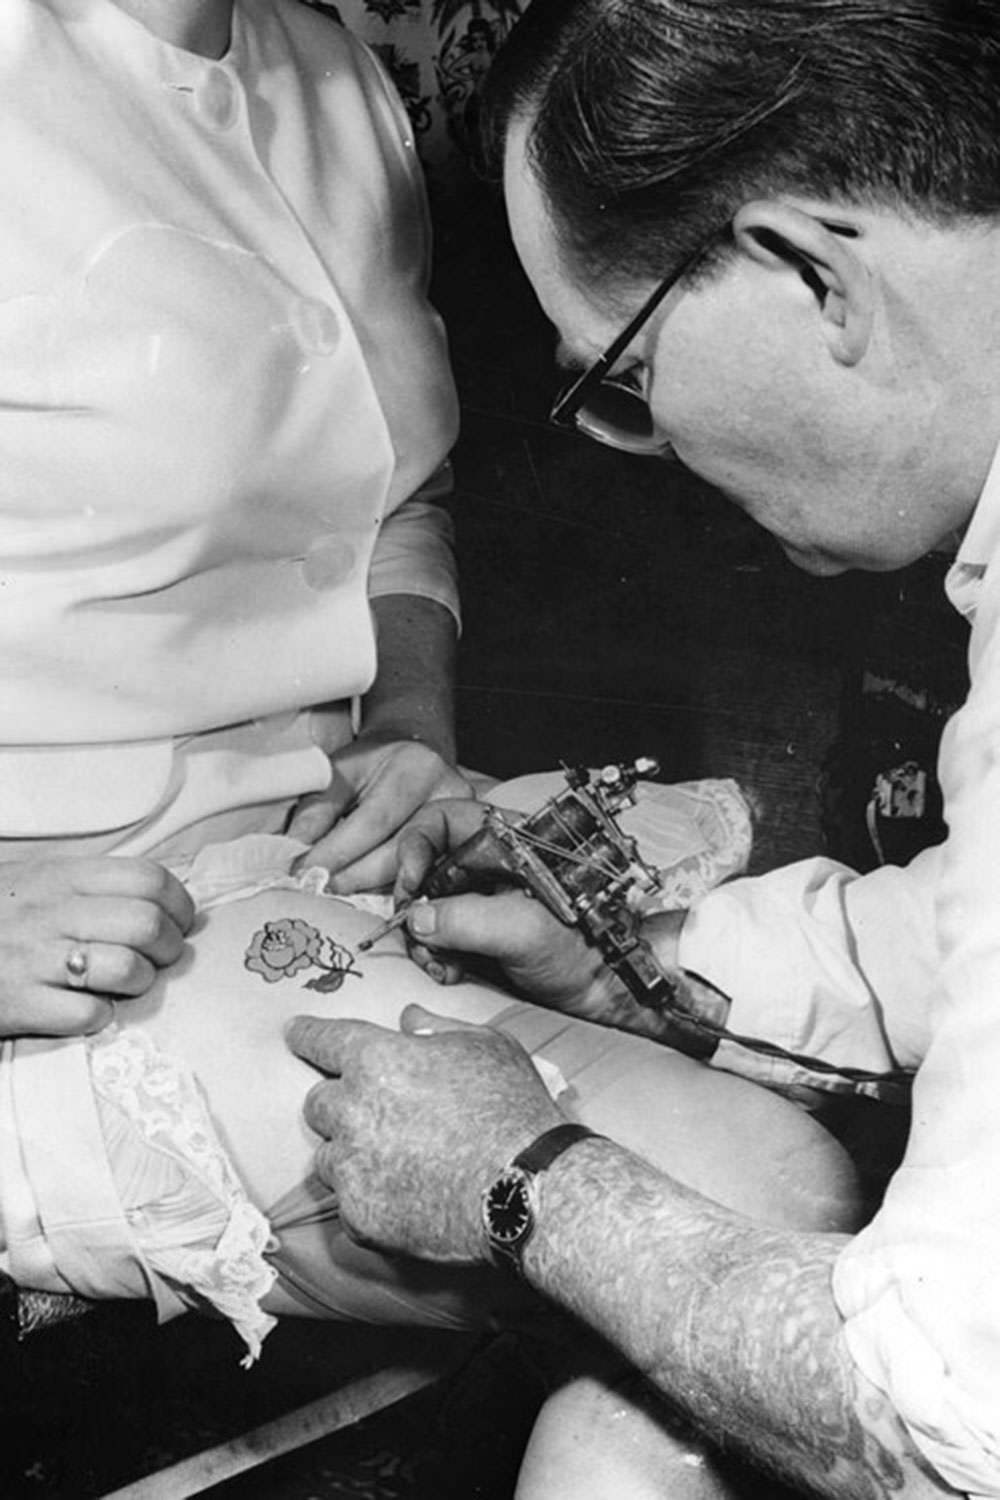 A tattooist paints a small rose on the thigh of a woman in 1961.